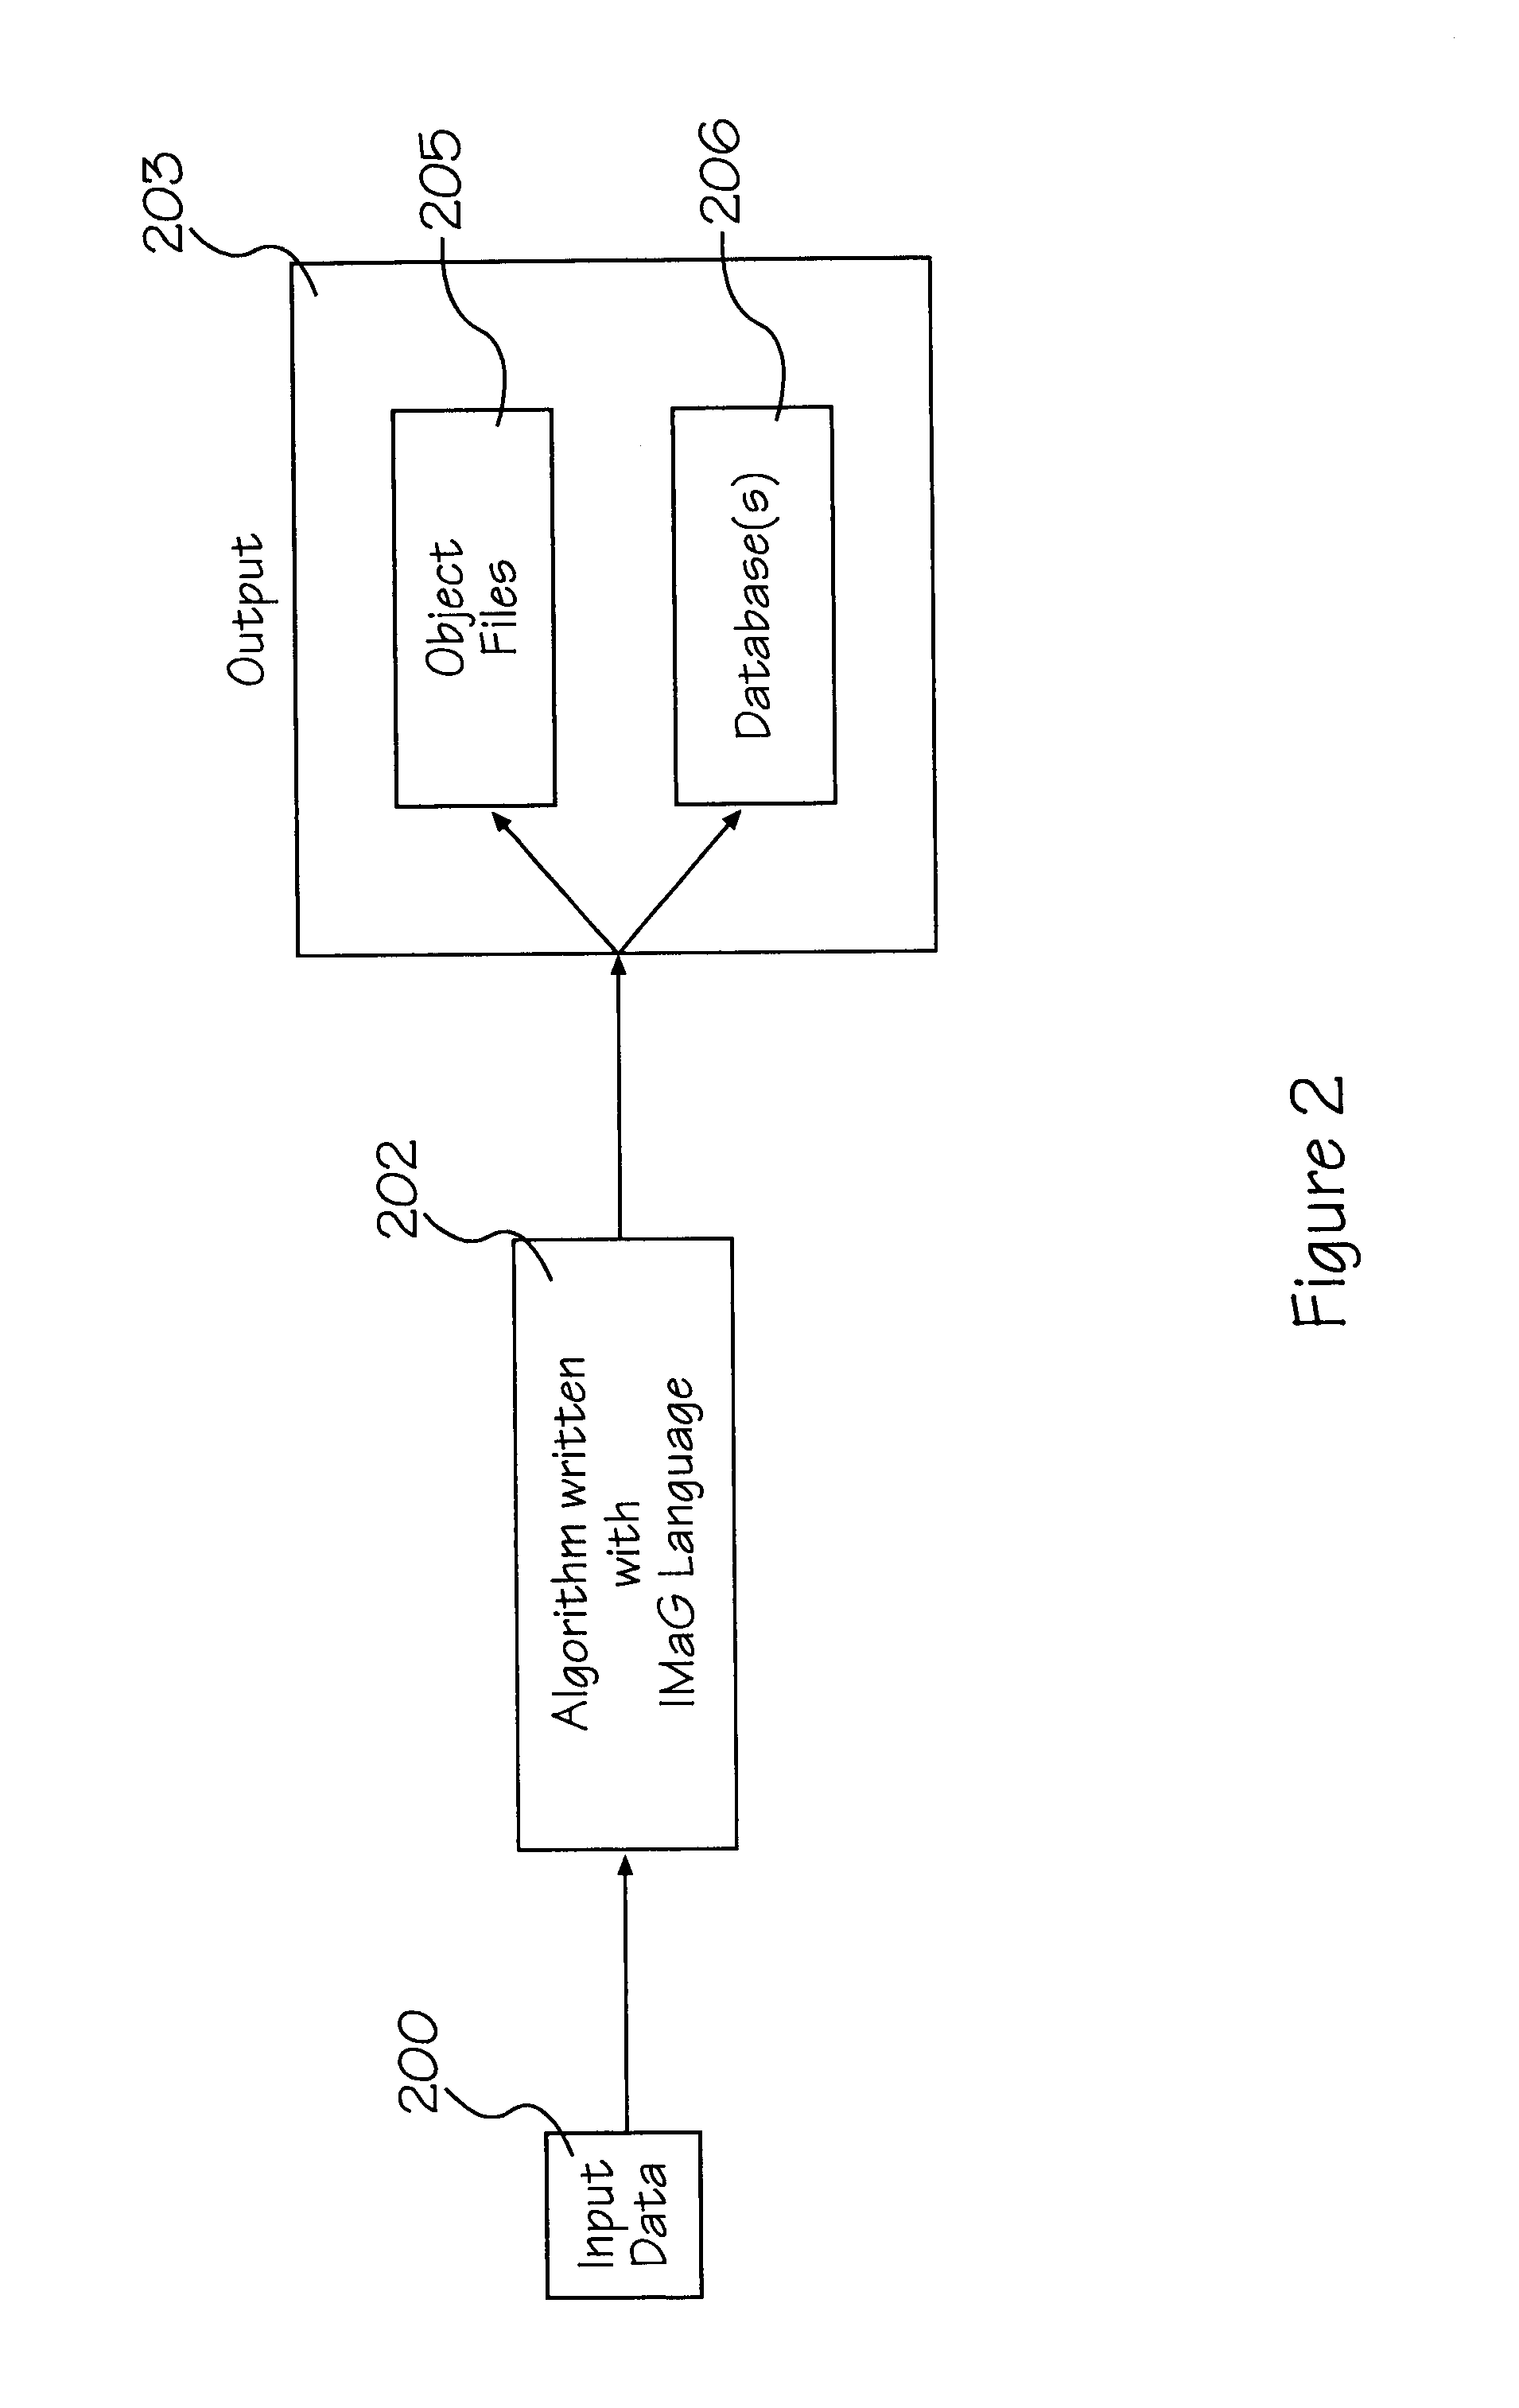 System for guiding users to formulate and use object extraction rules